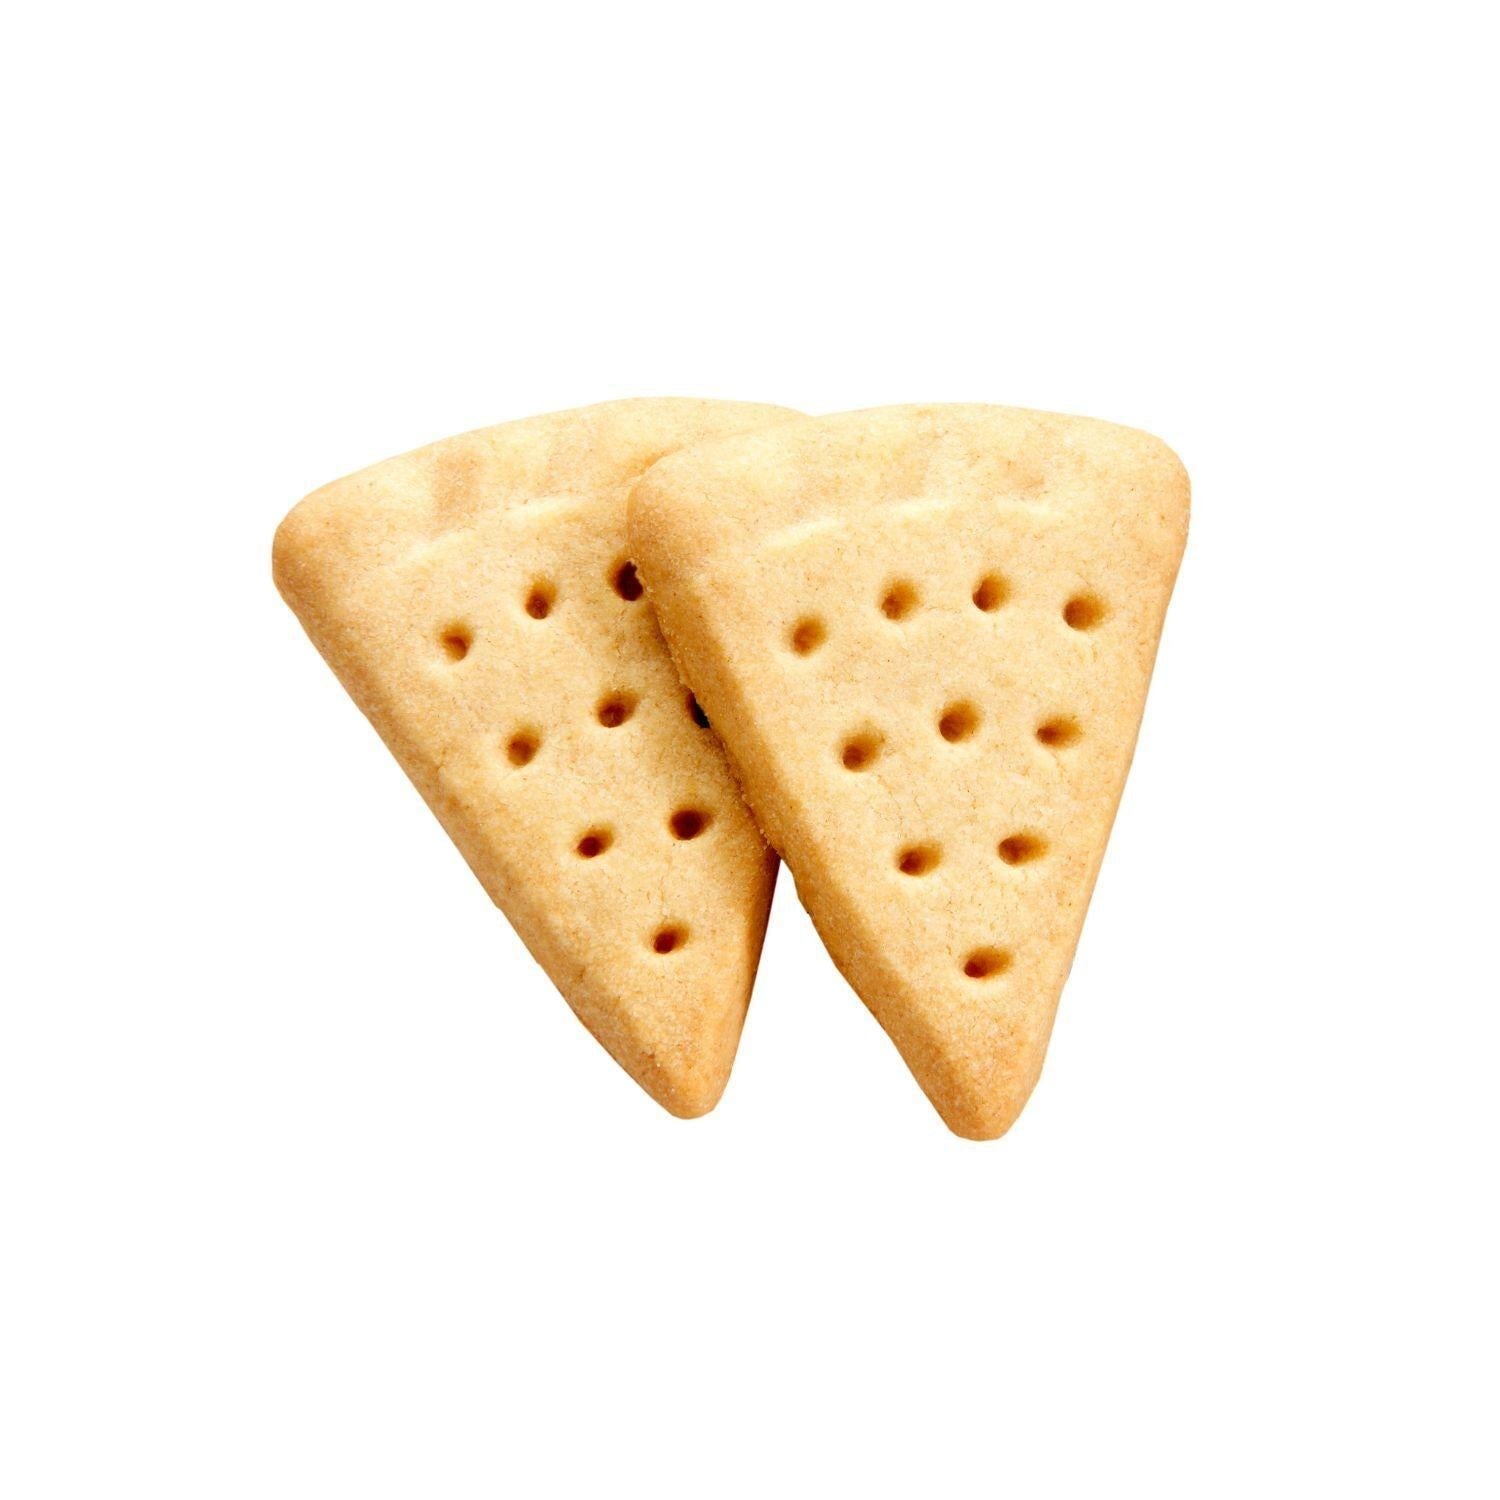 Walkers Shortbread Triangles Cookies 5.3 oz Can